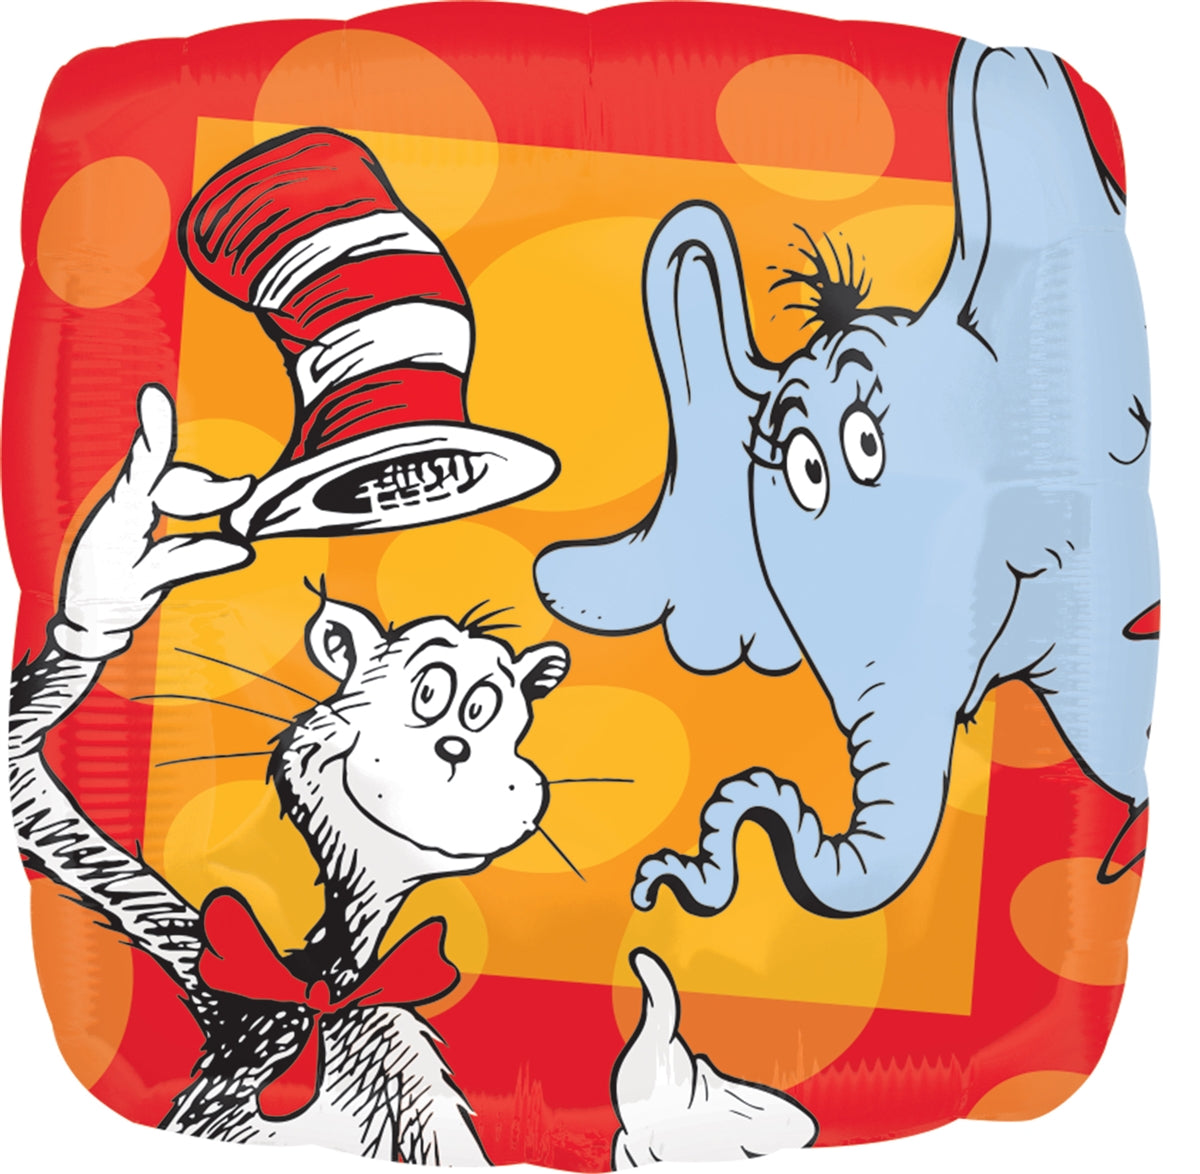 18" Dr. Seuss Foil Balloon | Buy 5 Or More Save 20%